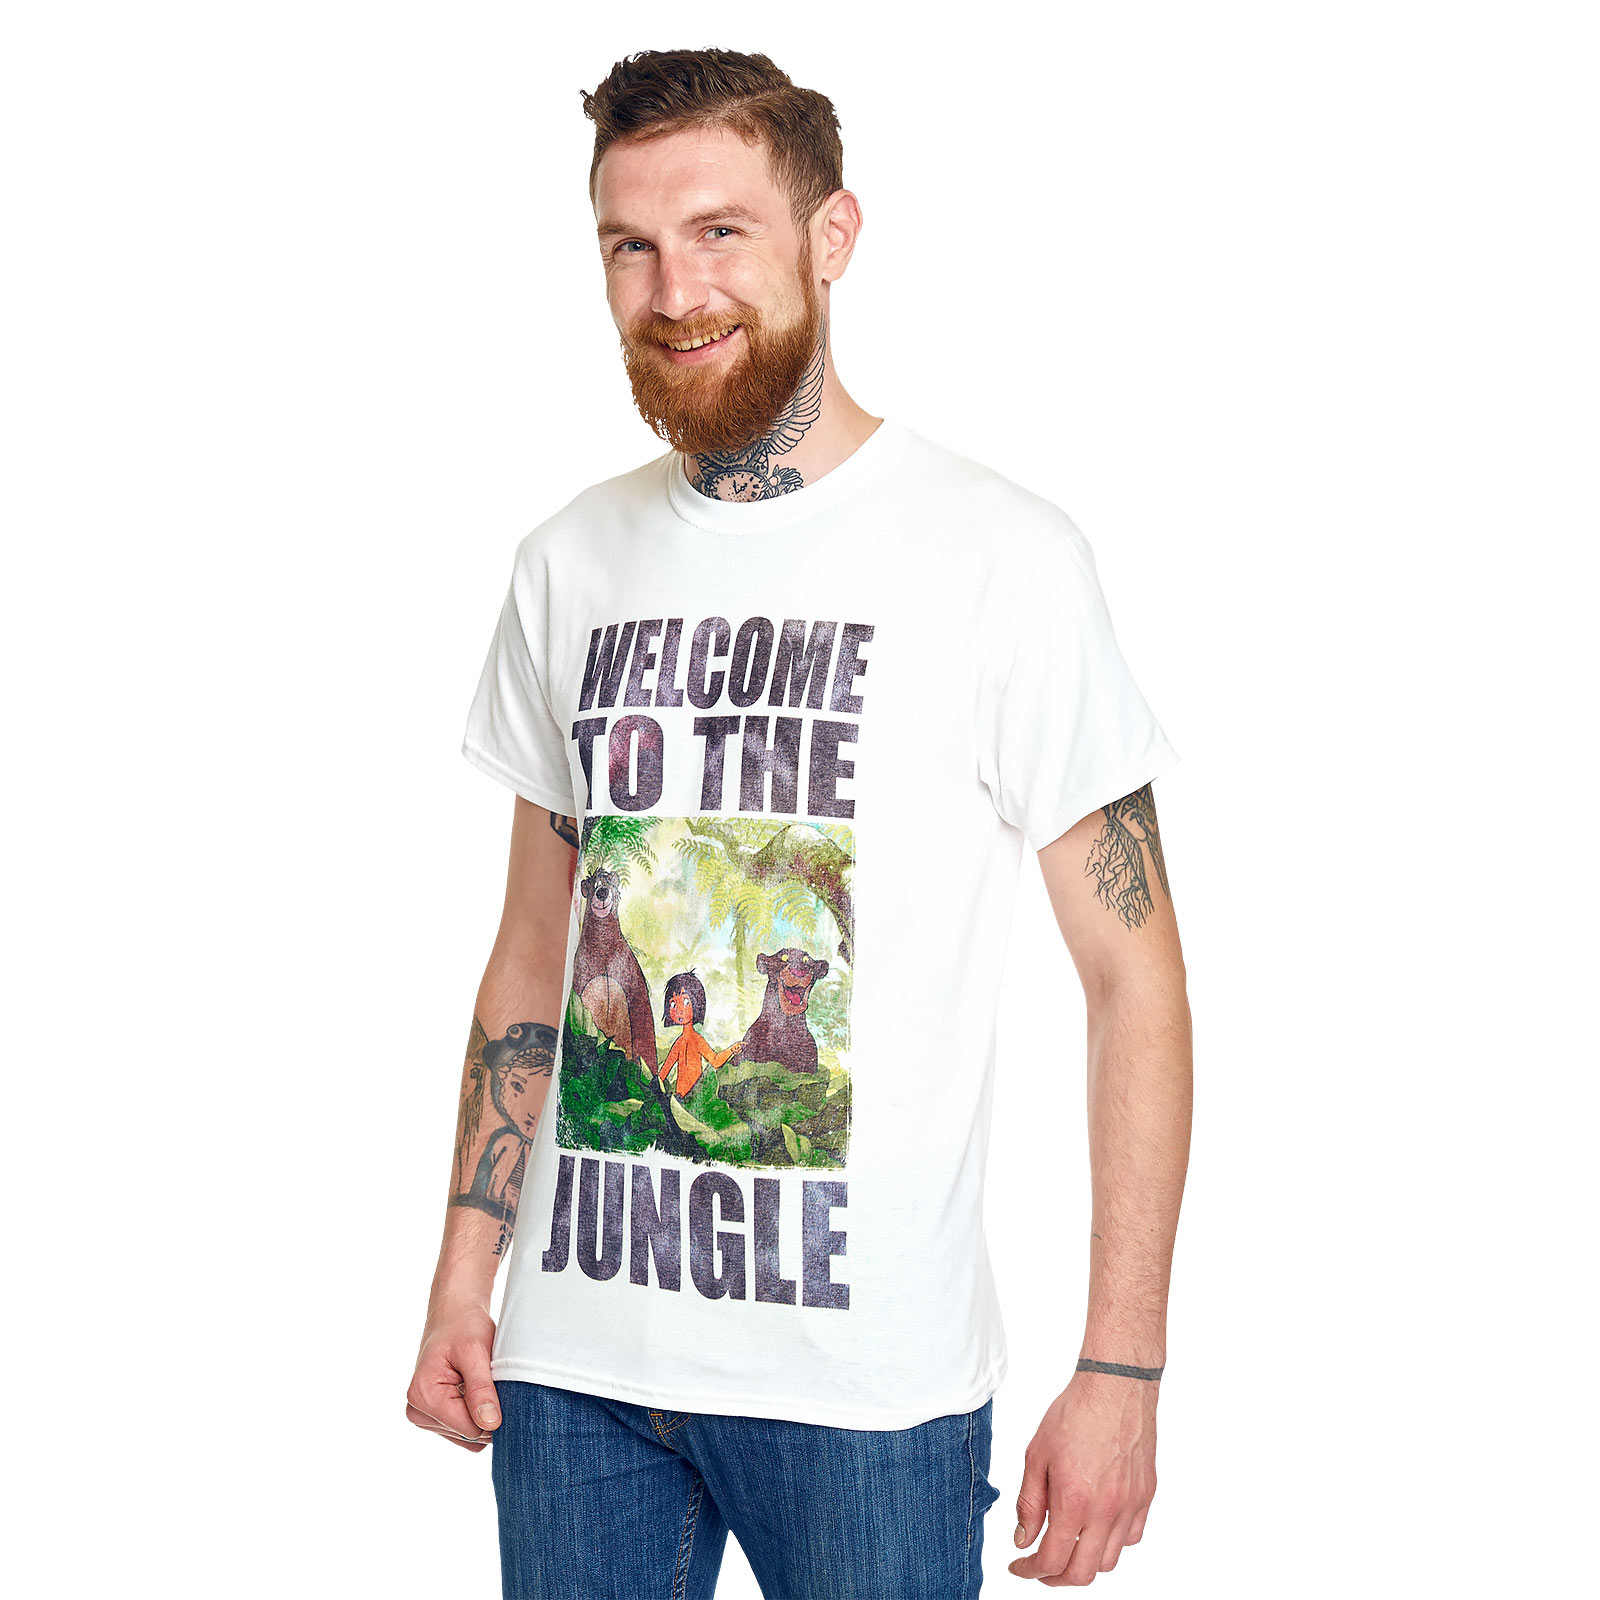 Jungle Book - Welcome to the Jungle T-Shirt white